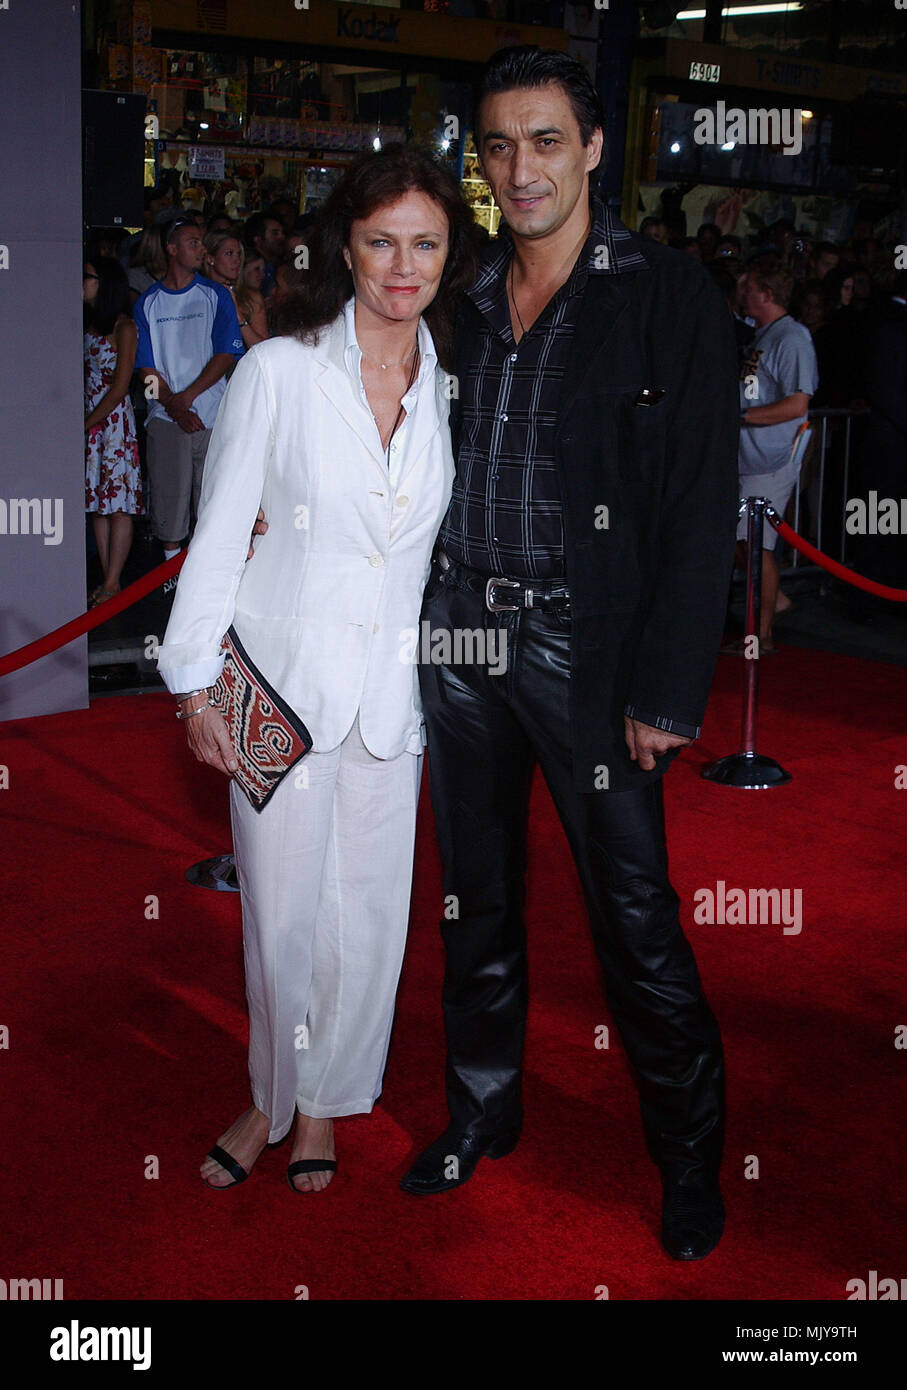 Jacqueline Bisset and Emin Boztepe arriving at the Premiere of ' Cold Creek Manor ' at the El Captain Theatre in Los Angeles. September 17, 2003          -            BissetJacq BoztepeAmin001.JPG           -              BissetJacq BoztepeAmin001.JPGBissetJacq BoztepeAmin001  Event in Hollywood Life - California,  Red Carpet Event, Vertical, USA, Film Industry, Celebrities,  Photography, Bestof, Arts Culture and Entertainment, Topix Celebrities fashion /  from the Red Carpet-, Vertical, Best of, Hollywood Life, Event in Hollywood Life - California,  Red Carpet , USA, Film Industry, Celebritie Stock Photo